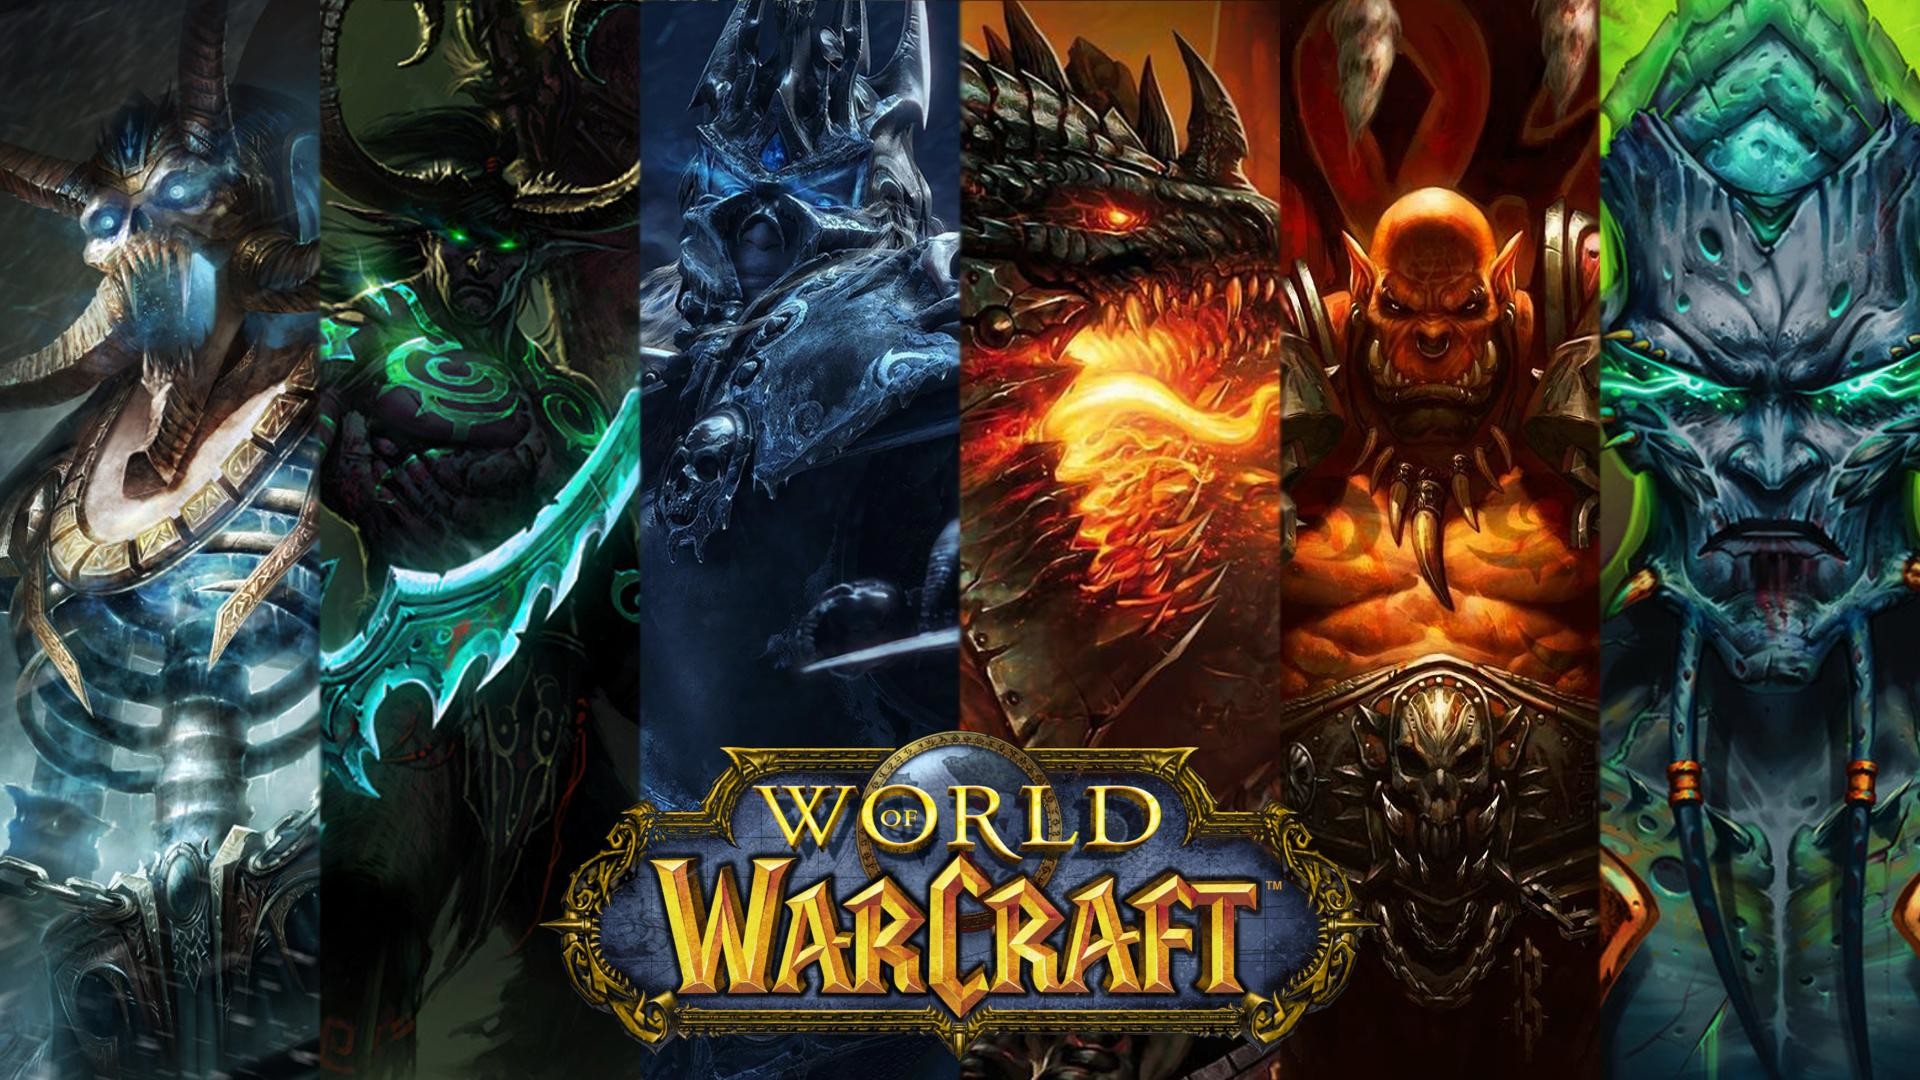 ImageSomeone requested an updated WoW Wallpaper, here's what I came up with.